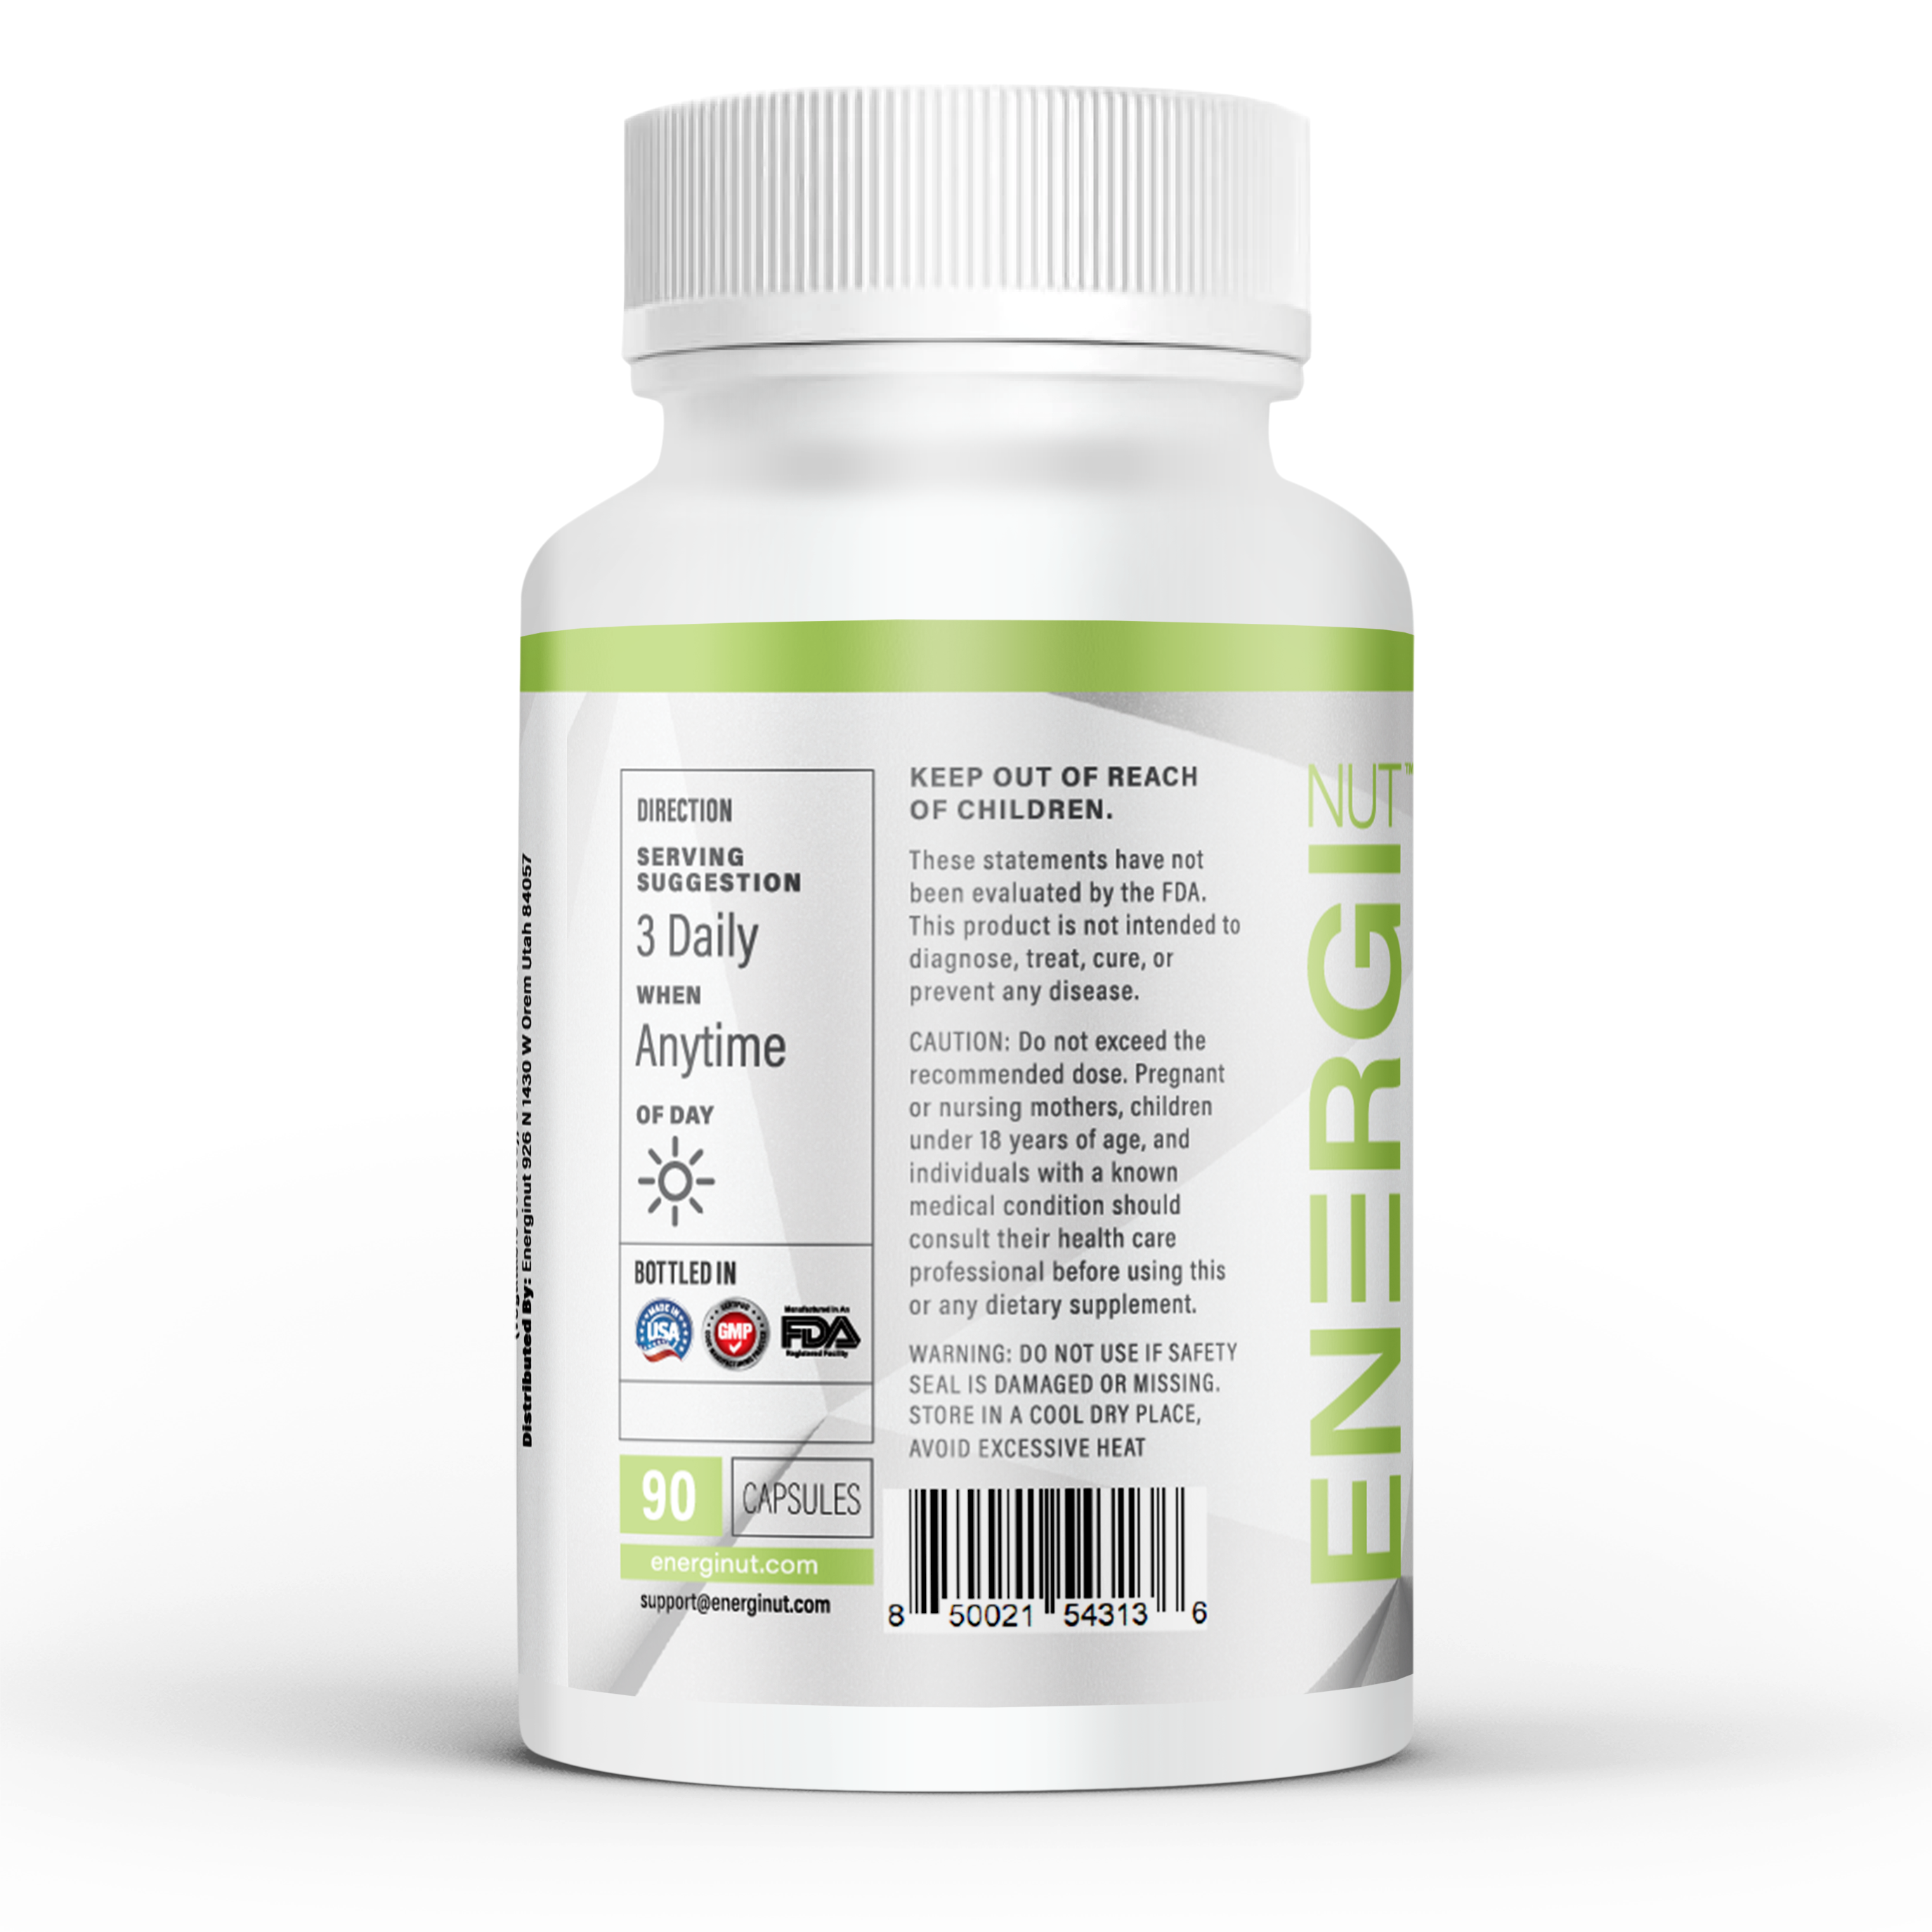 Cortisol Control / Adrenal Blend